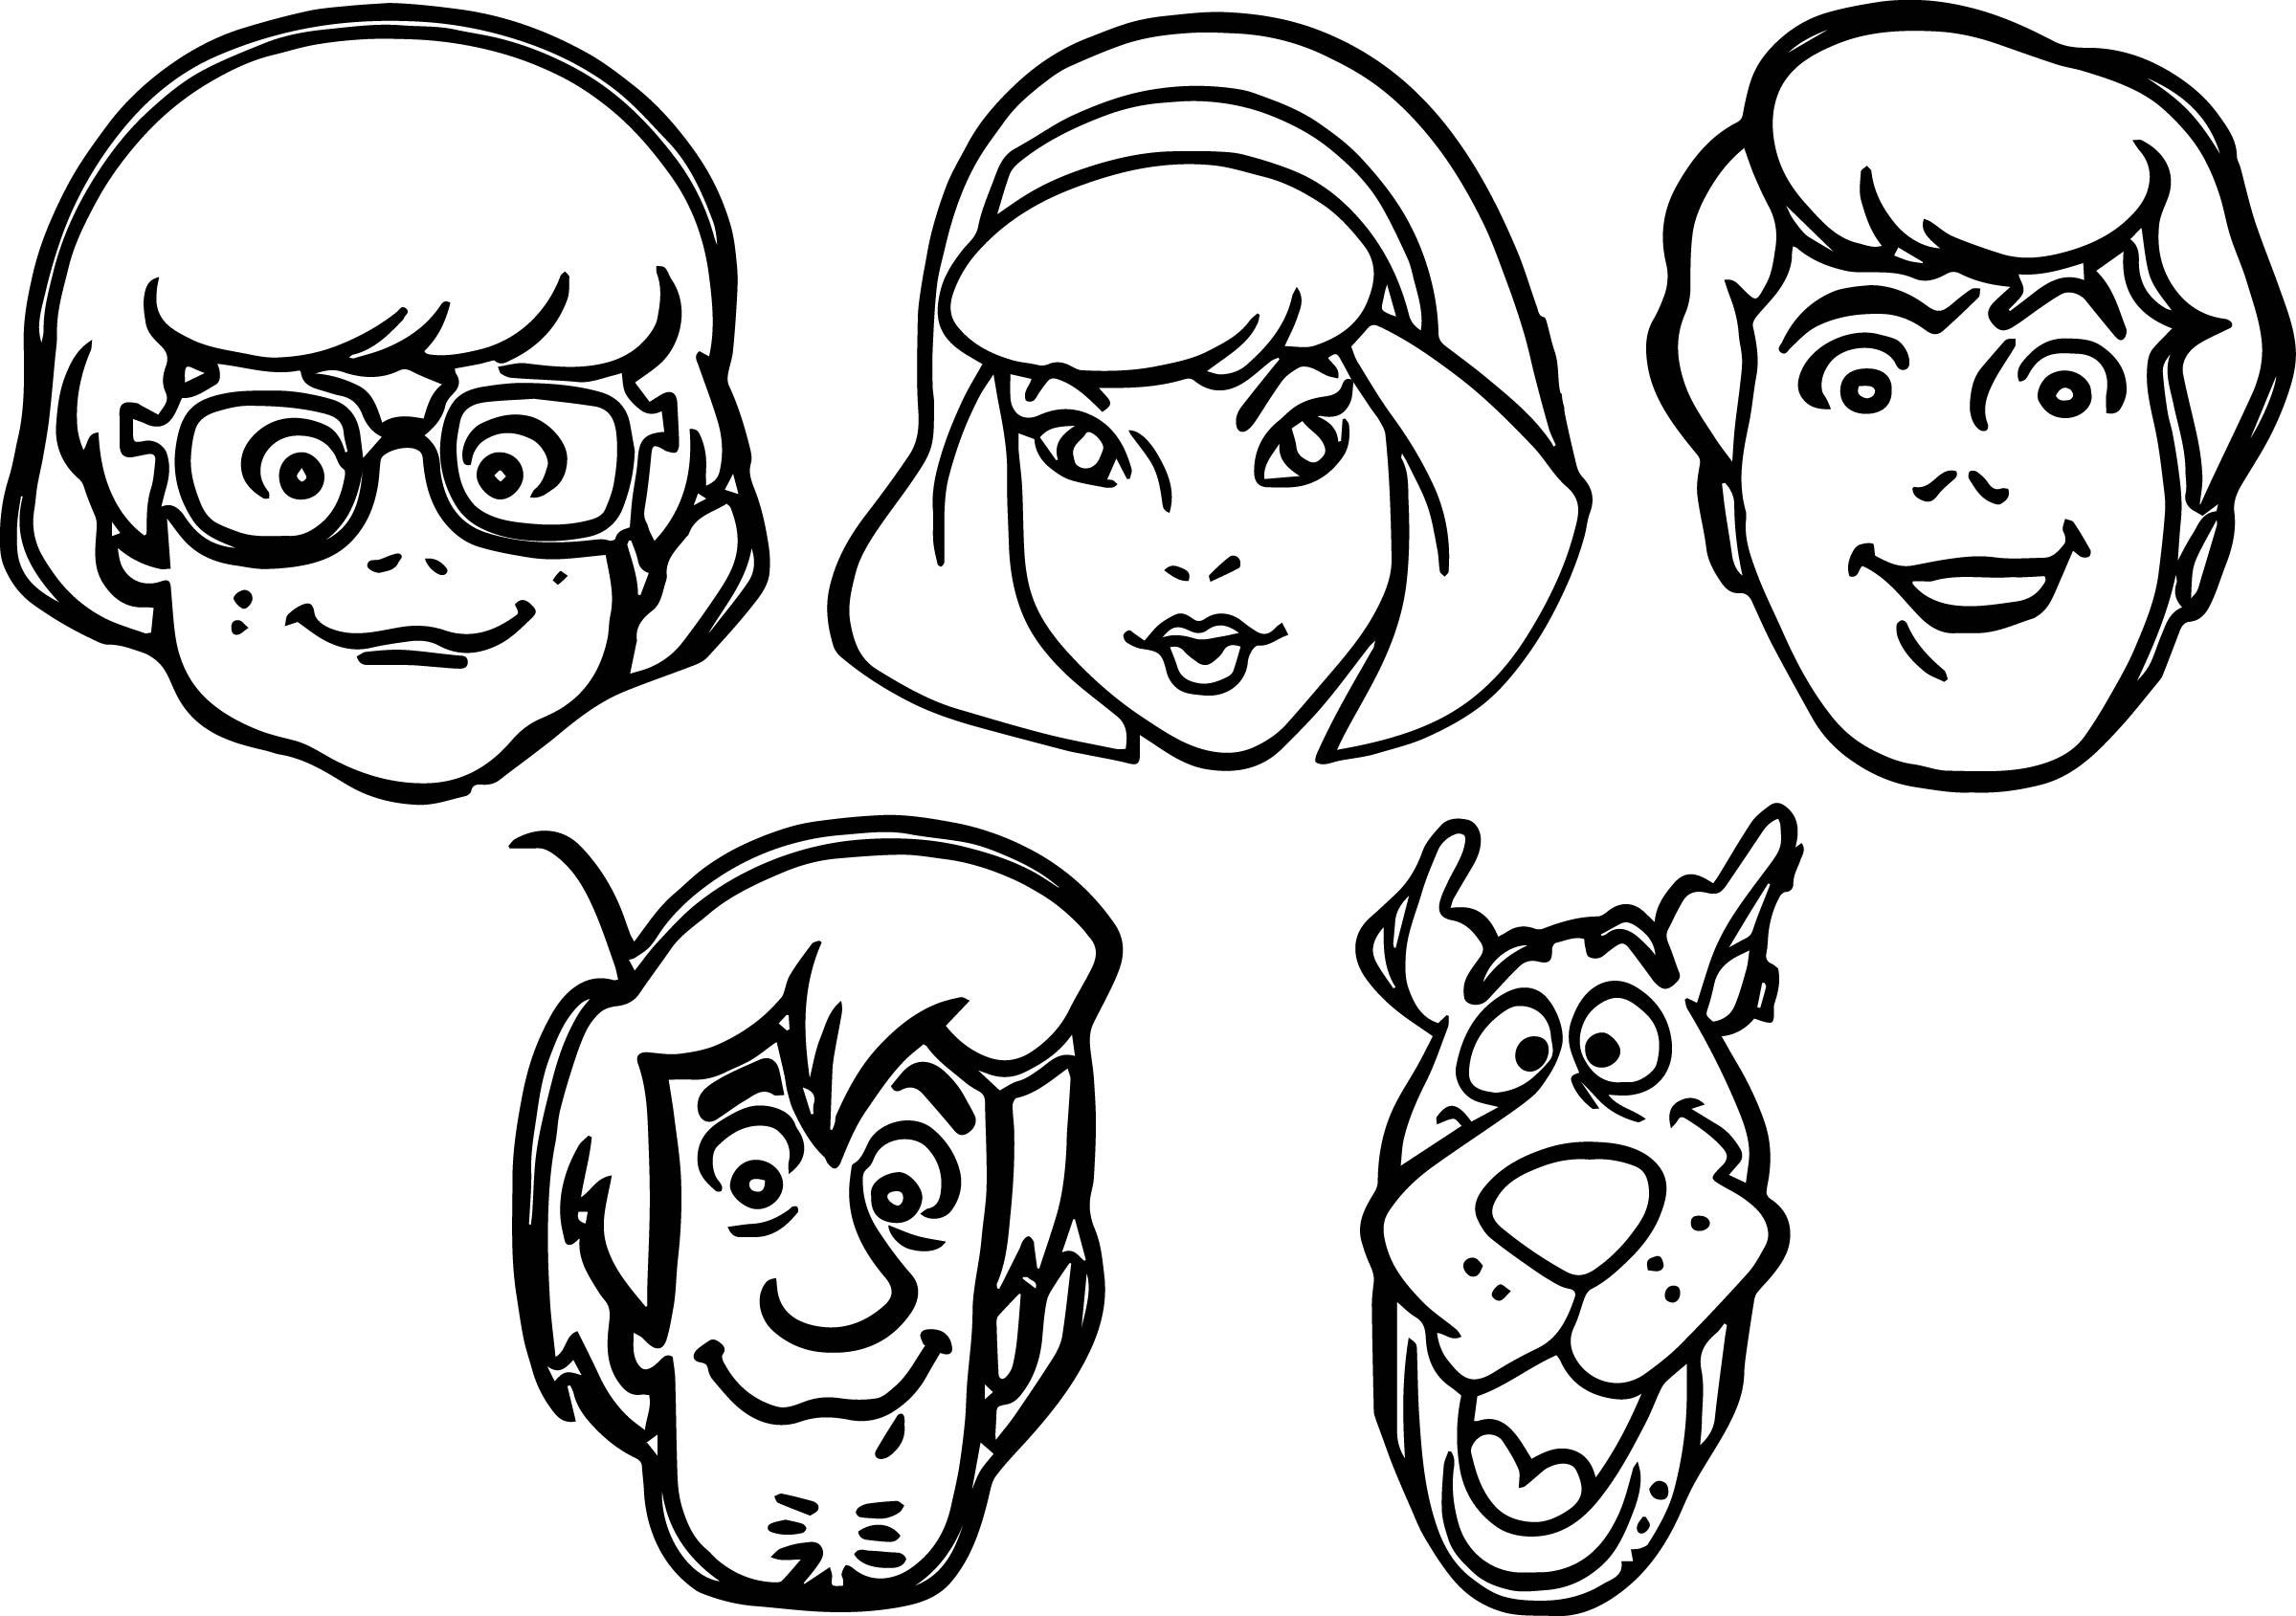 Scooby Doo Halloween Coloring - Scooby Doo Face Drawing. 